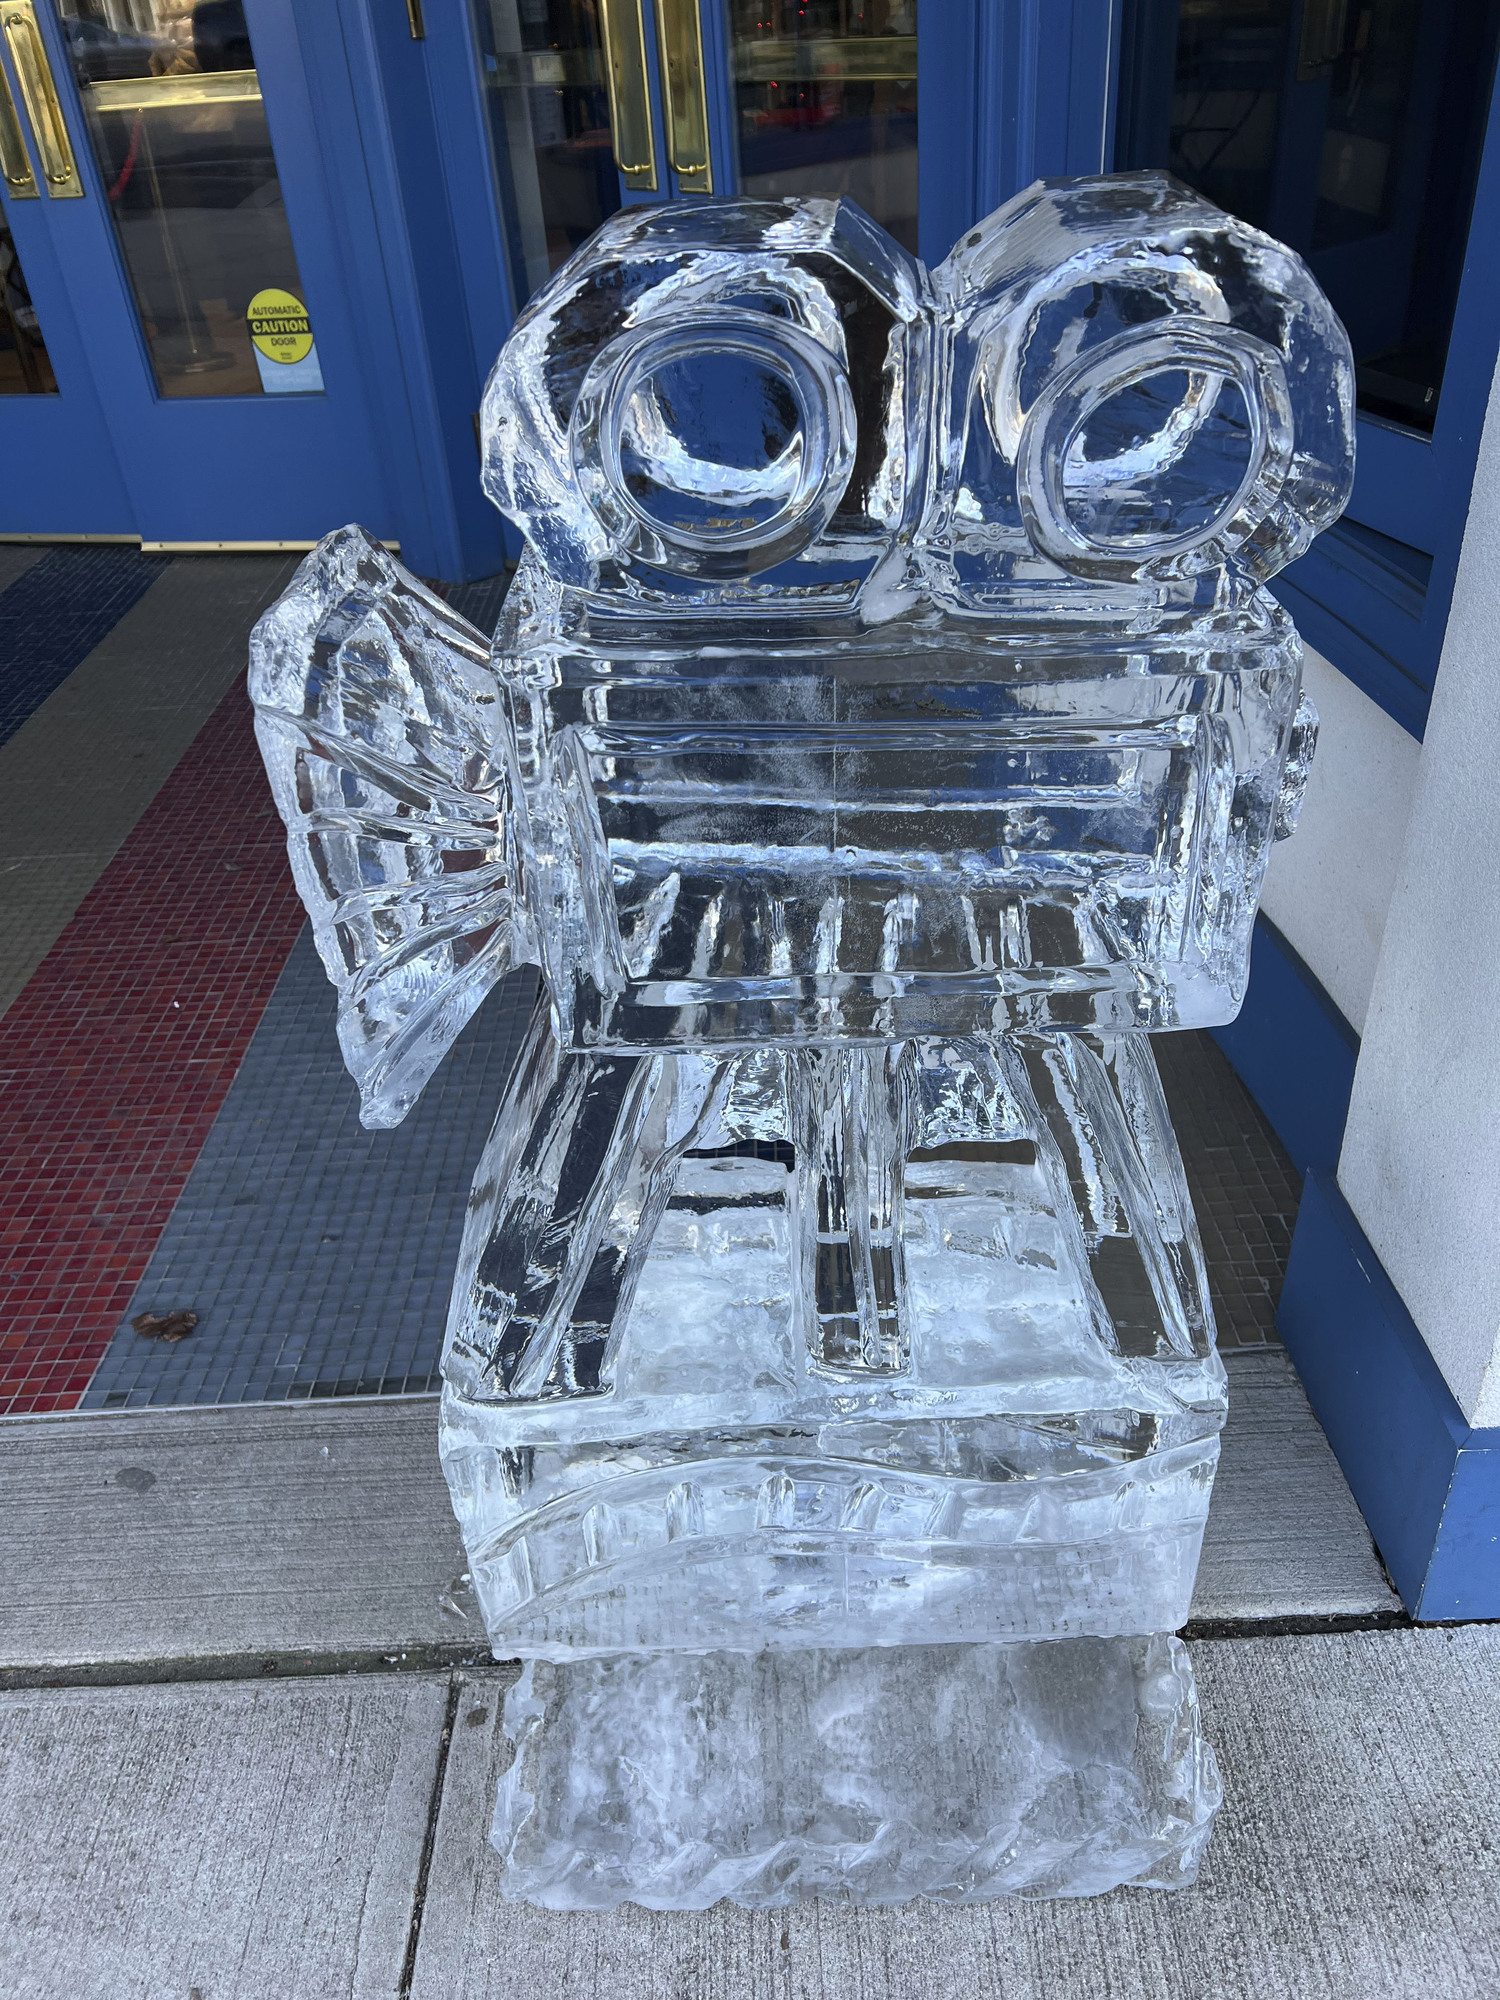 Rich Daly and his team set up more than 30  hand-crafted ice sculptures scattered throughout the village and up and down Main Street for HarborFrost.   DANA SHAW